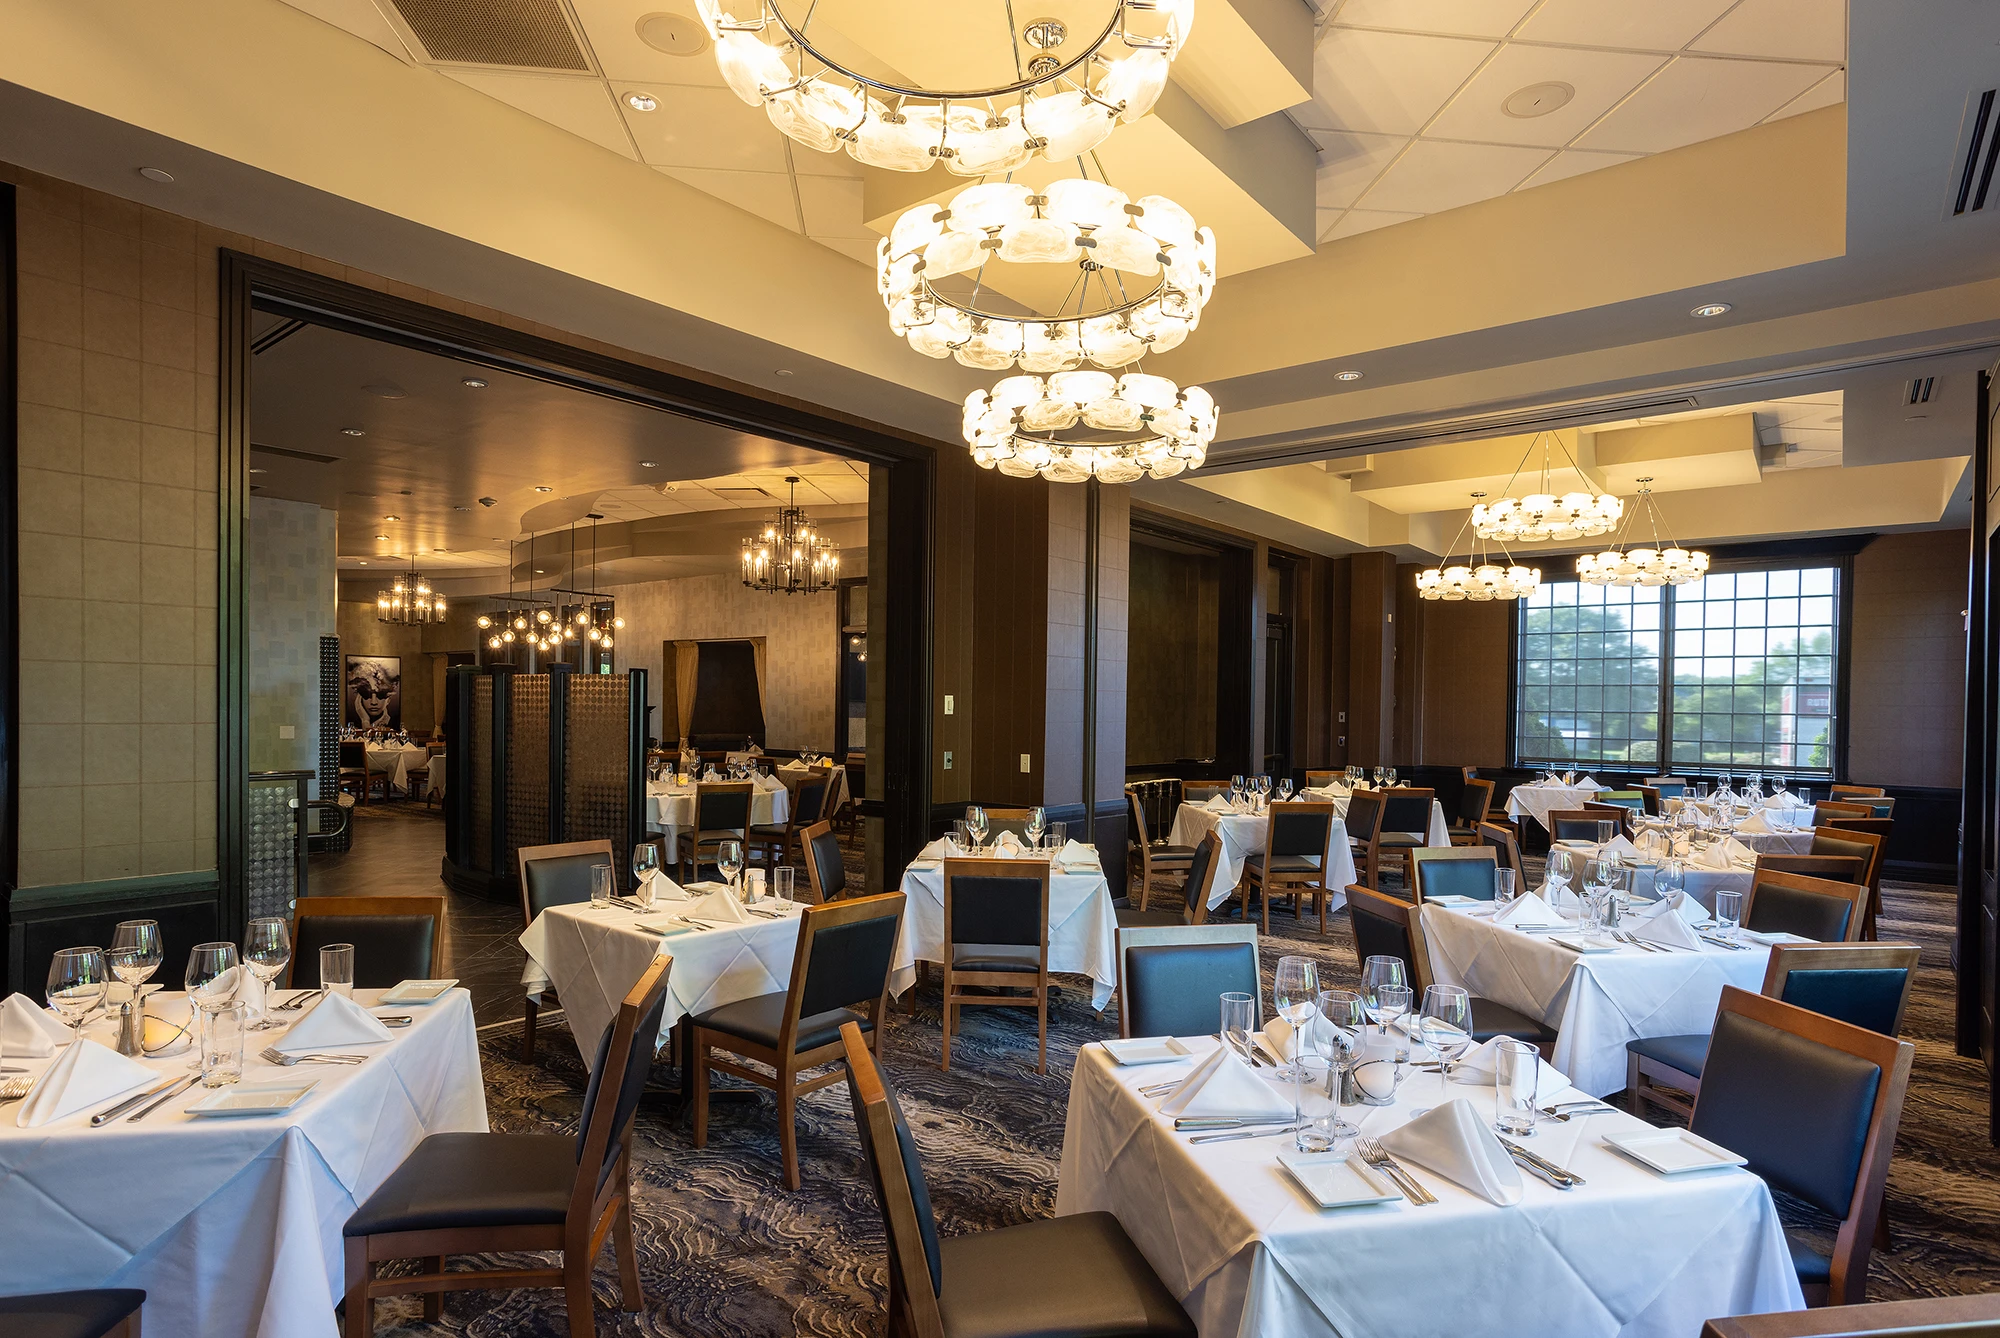 Newly Remodeled South Bend/Mishawaka’s Ruth’s Chris Steak House Reopens